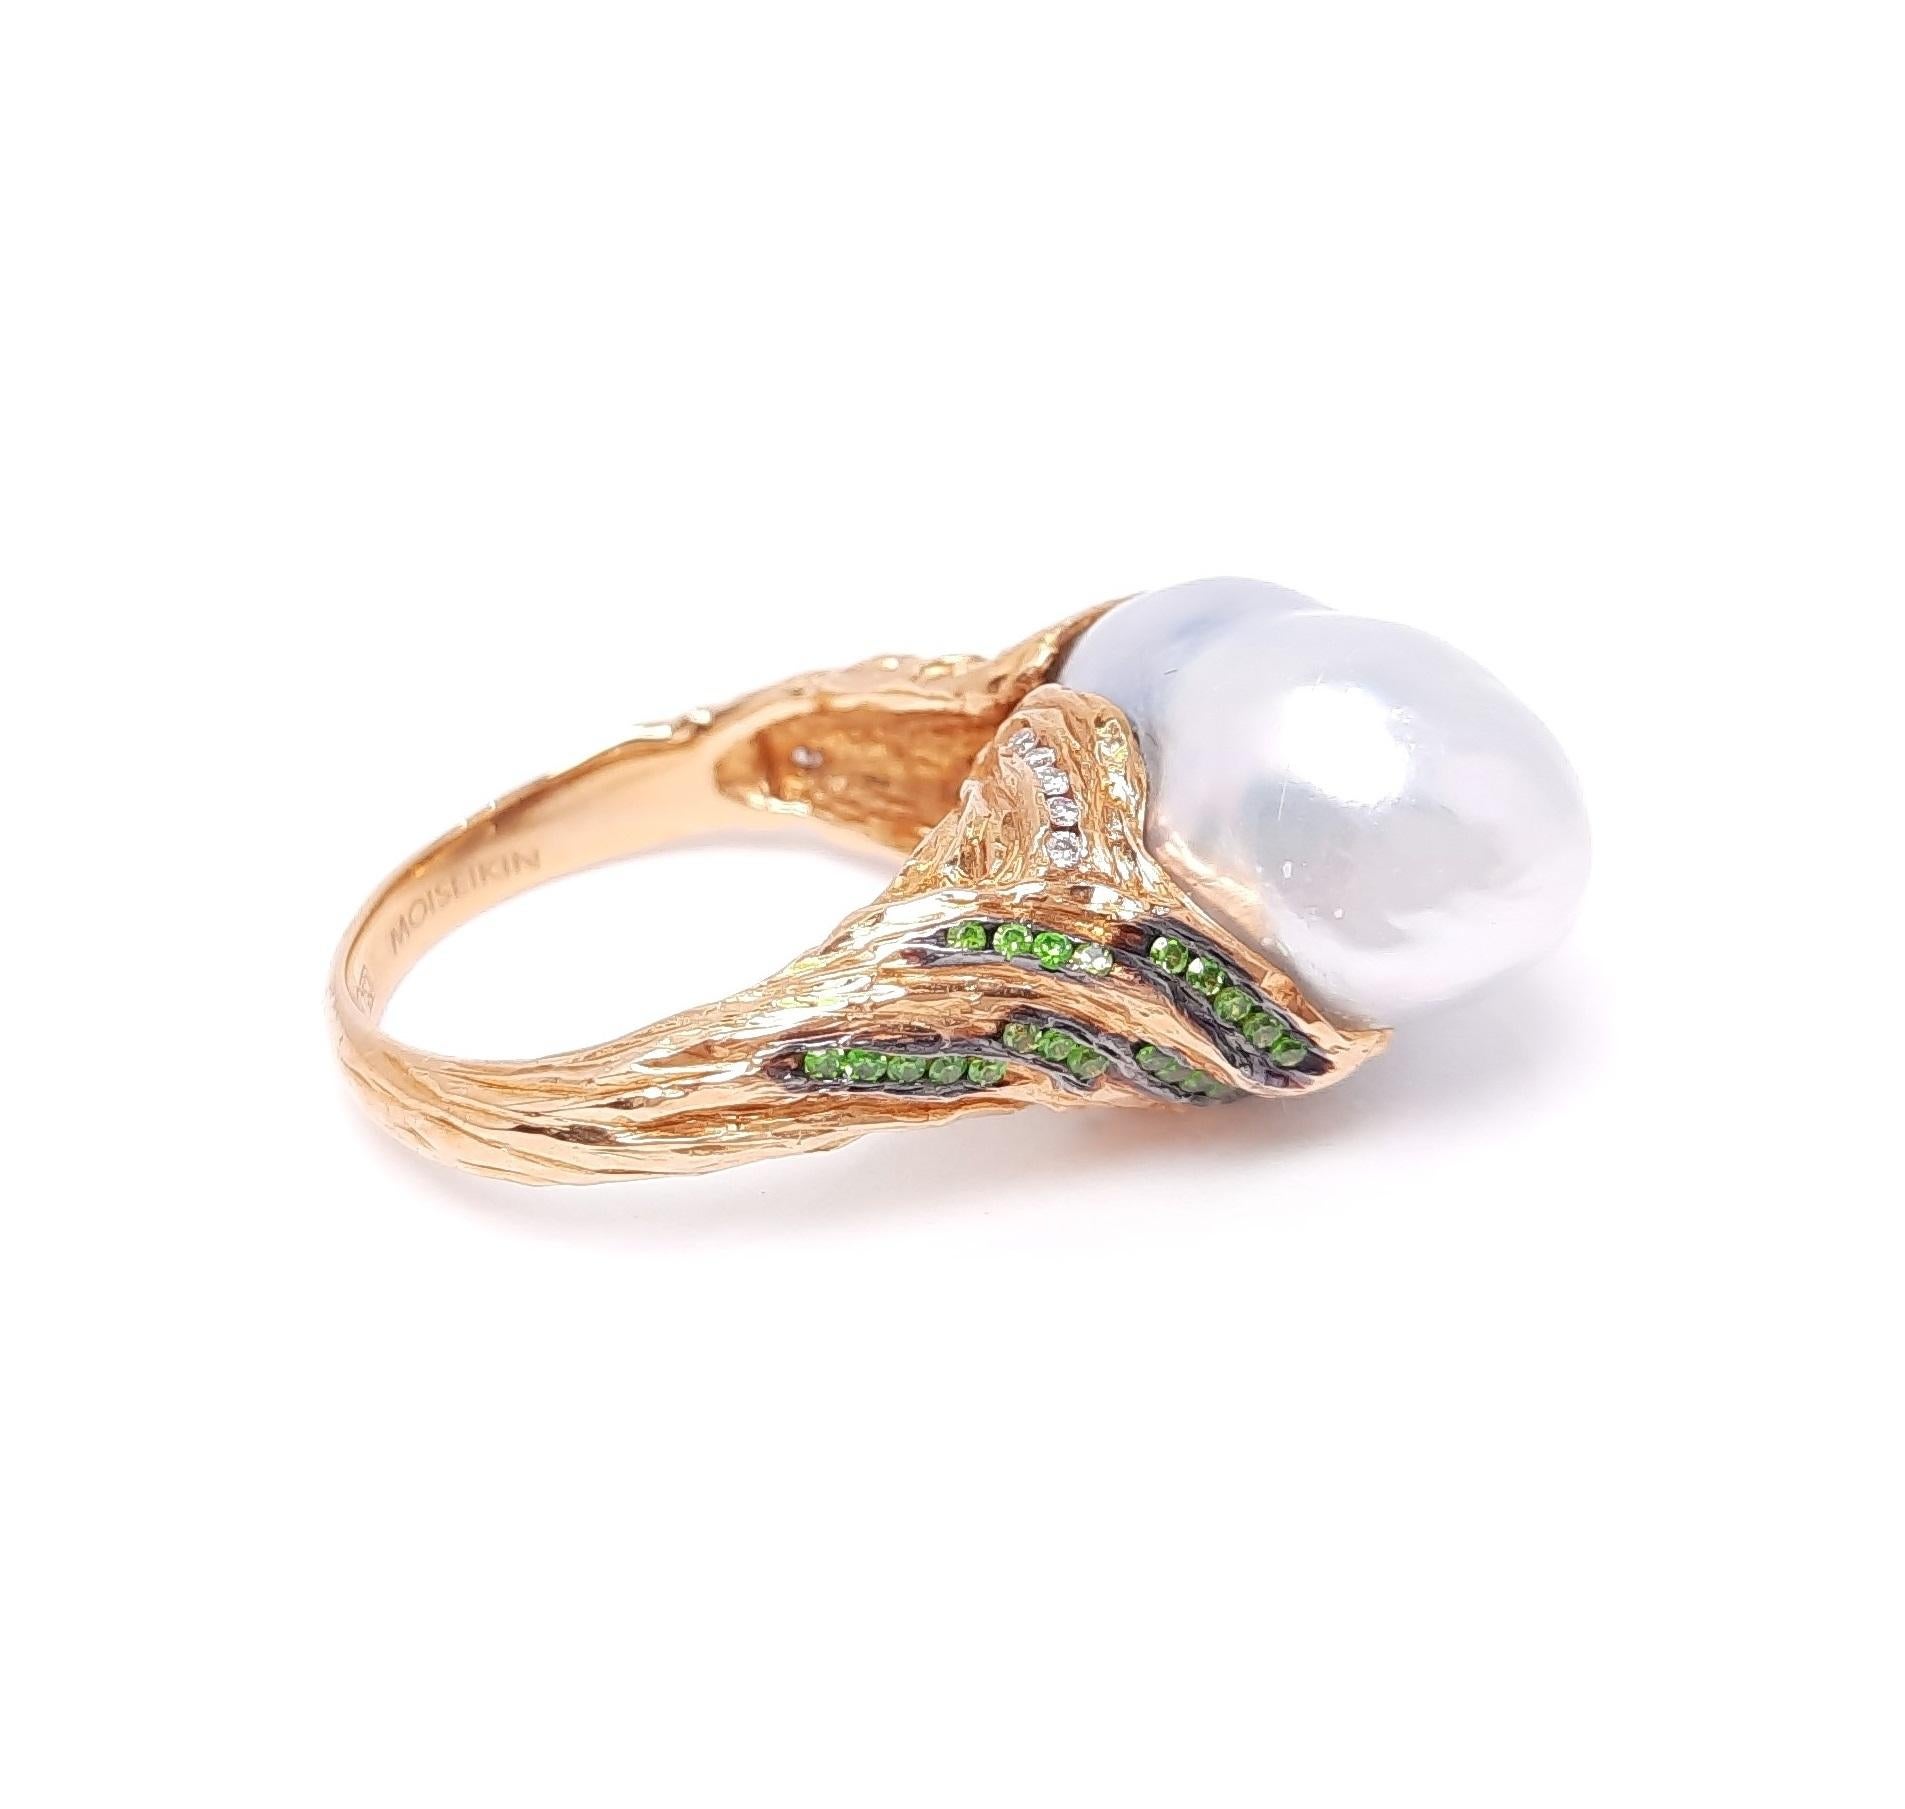 Inspired by impressionism and Starry Night by Vincent Van Gogh, MOISEIKIN has created the swirling night sky image with unique form of south sea baroque pearl, diamonds, rare demantoid garnets and sapphires. The detailed carving on the ring shank,